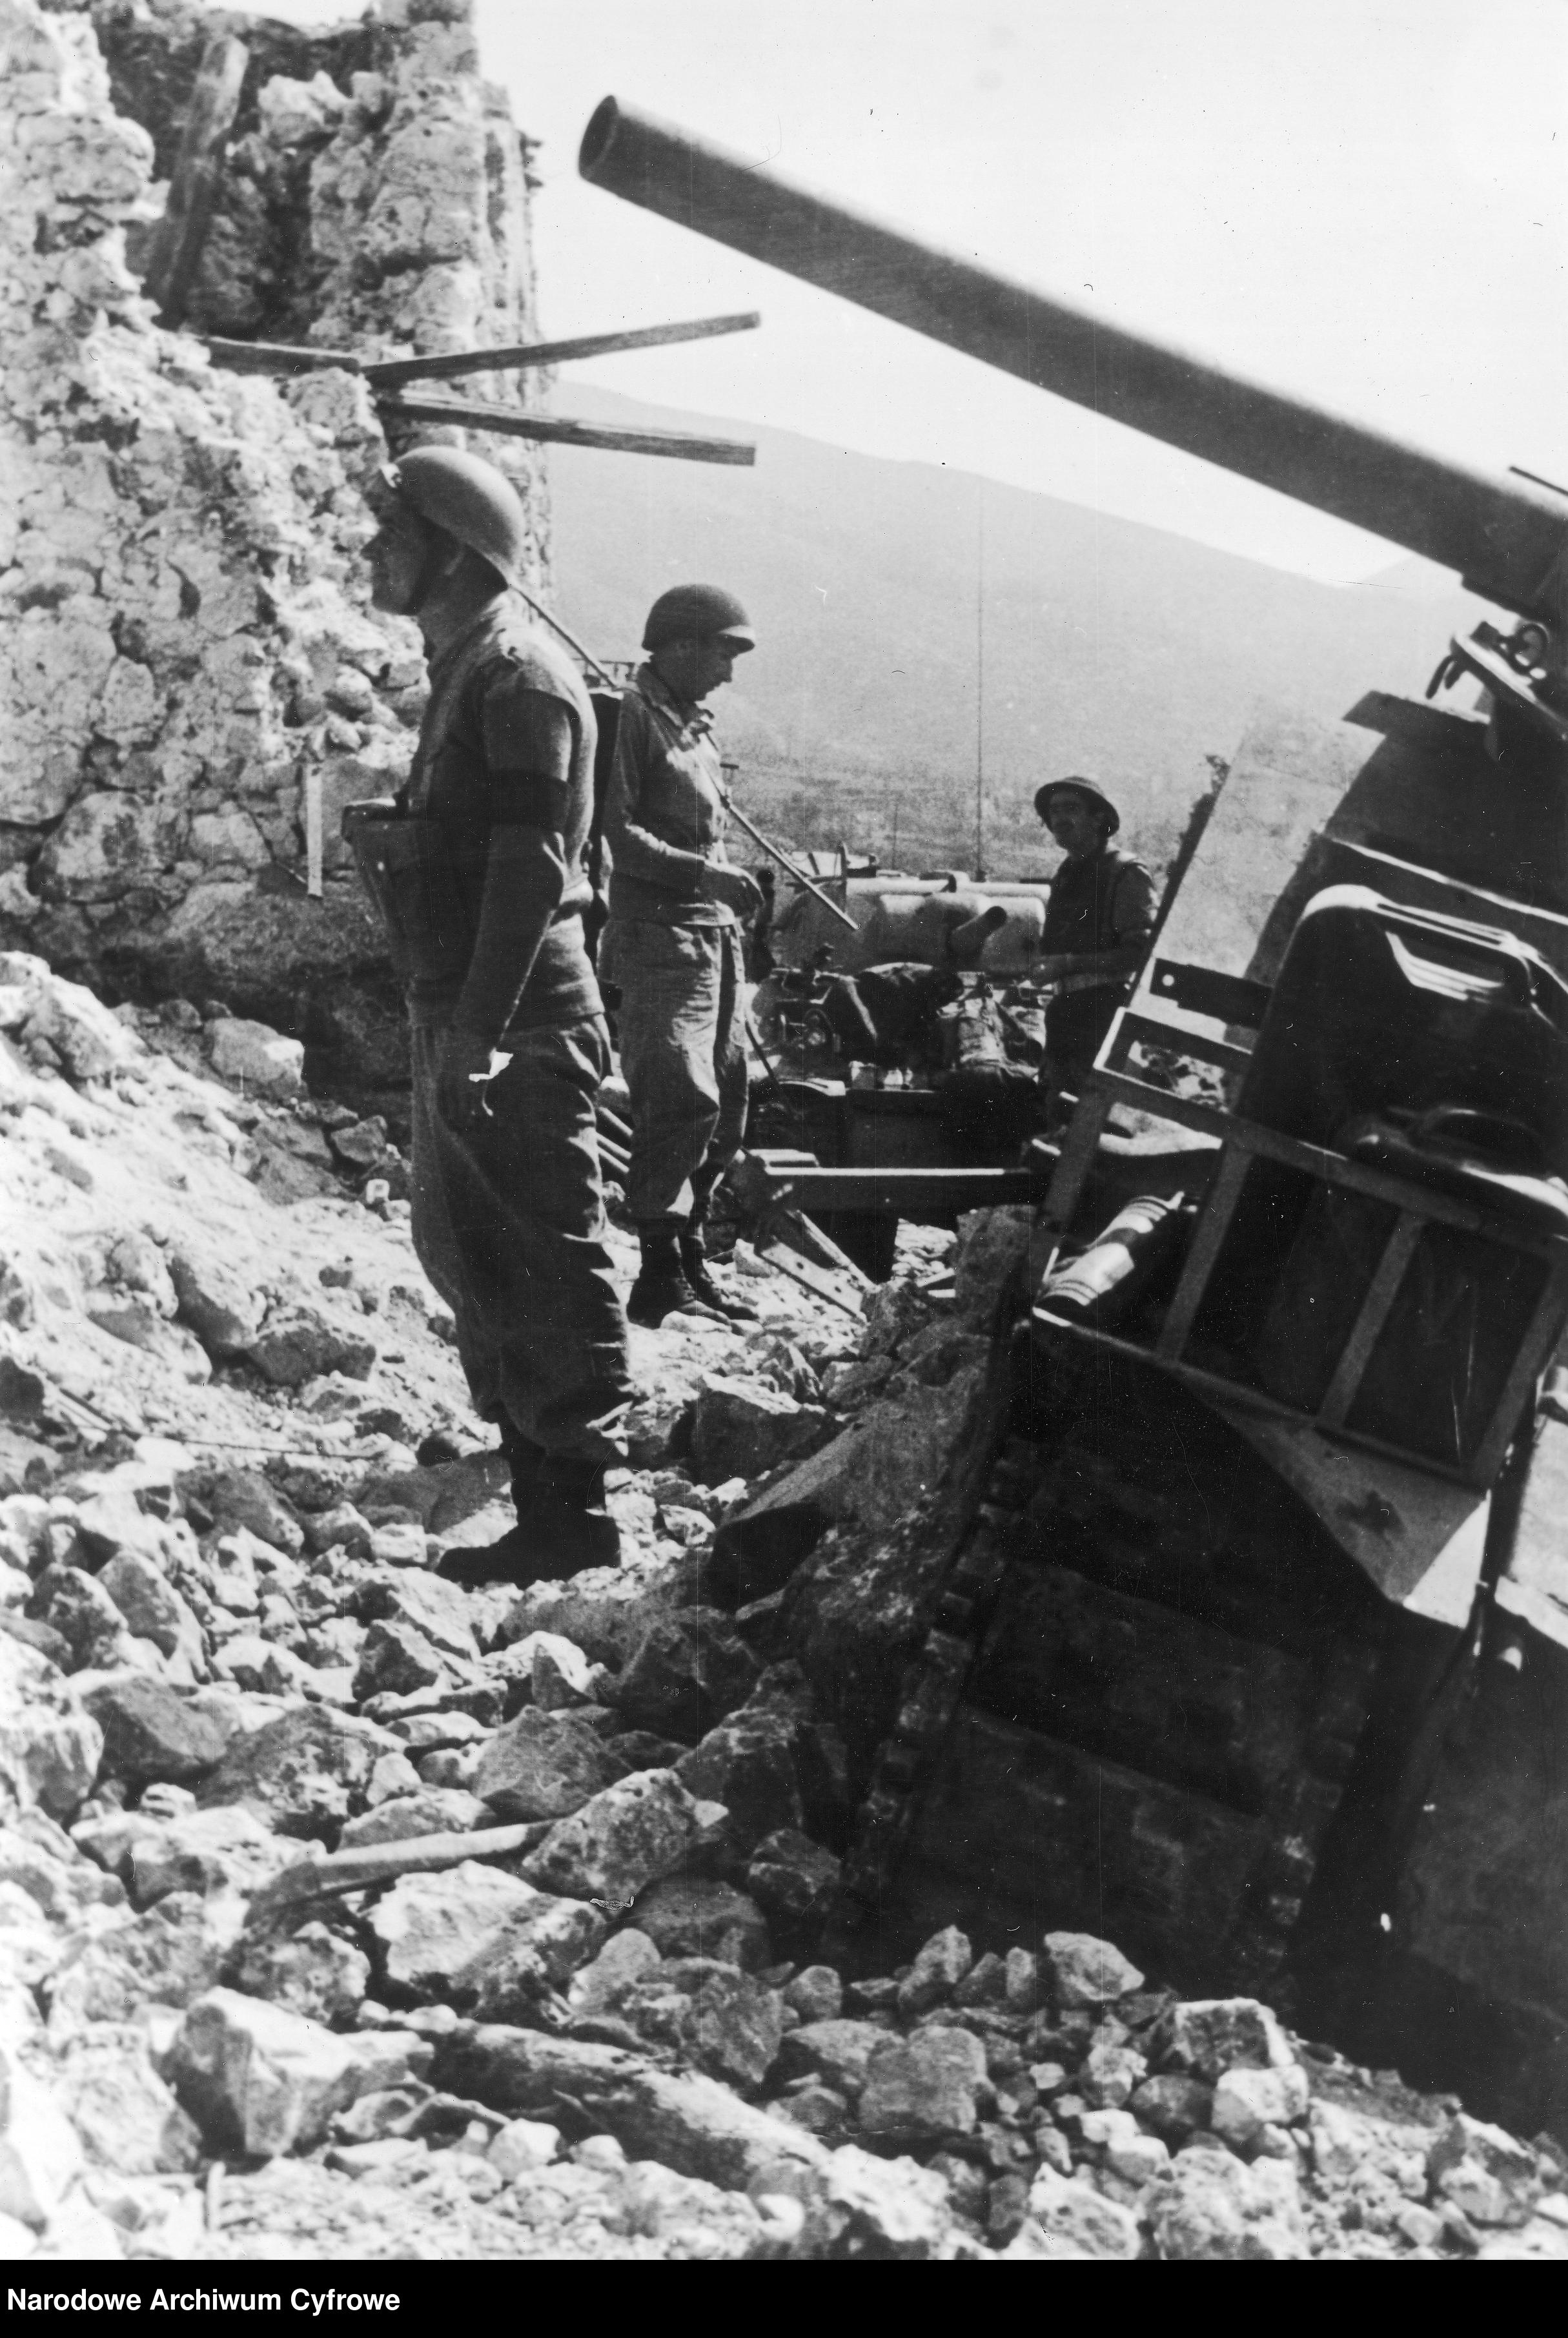 <p class='eng'>1944/05/25<br />Soldiers in the ruins. Visible tank M4 Sherman from the 6th Armored Regiment "Children of Lviv".<br />NAC 3/24/0/-/458/5</p>